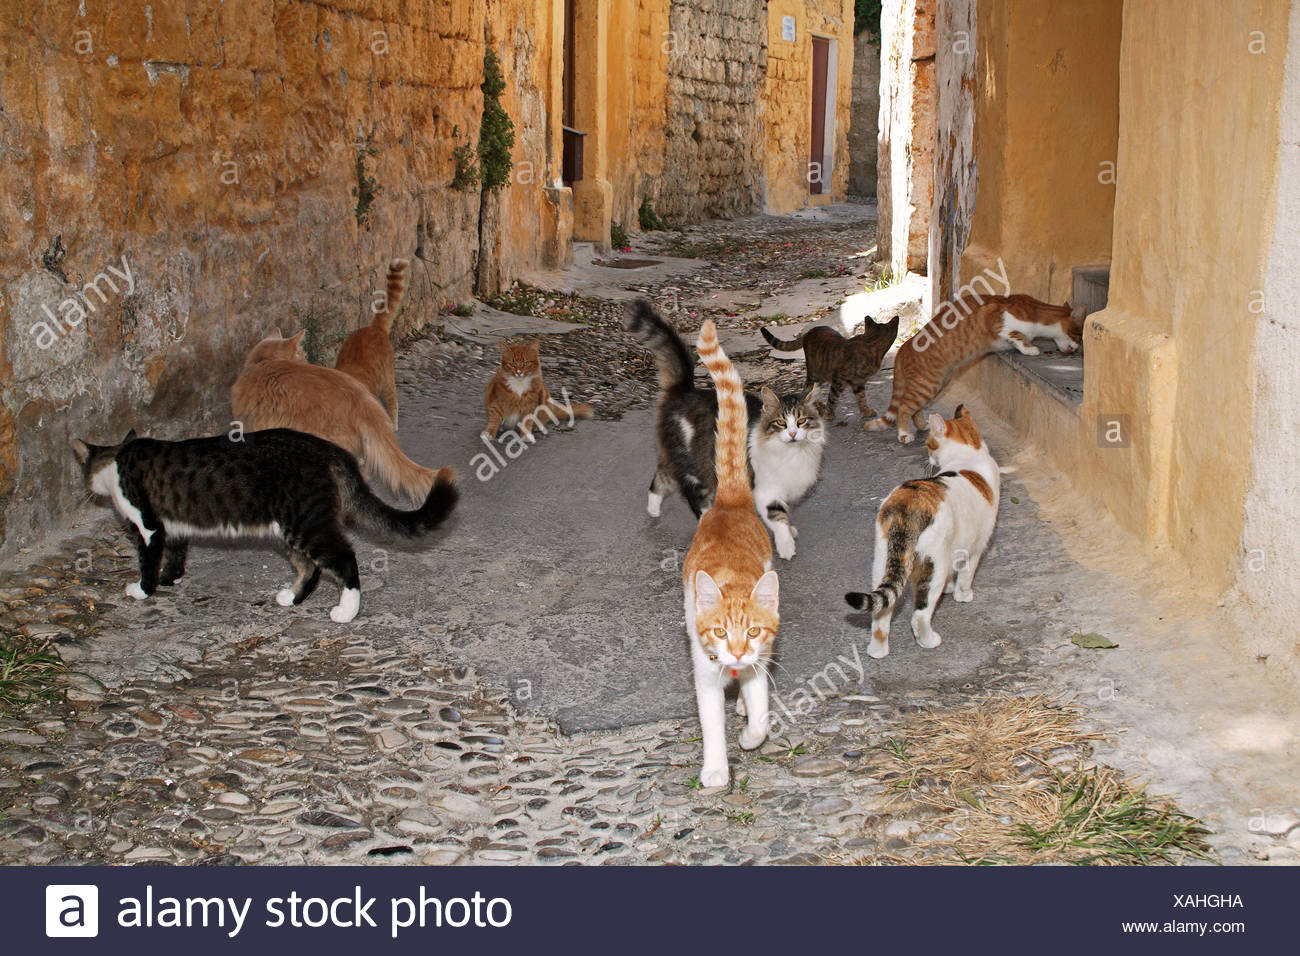 several-cats-in-alley-XAHGHA.jpg